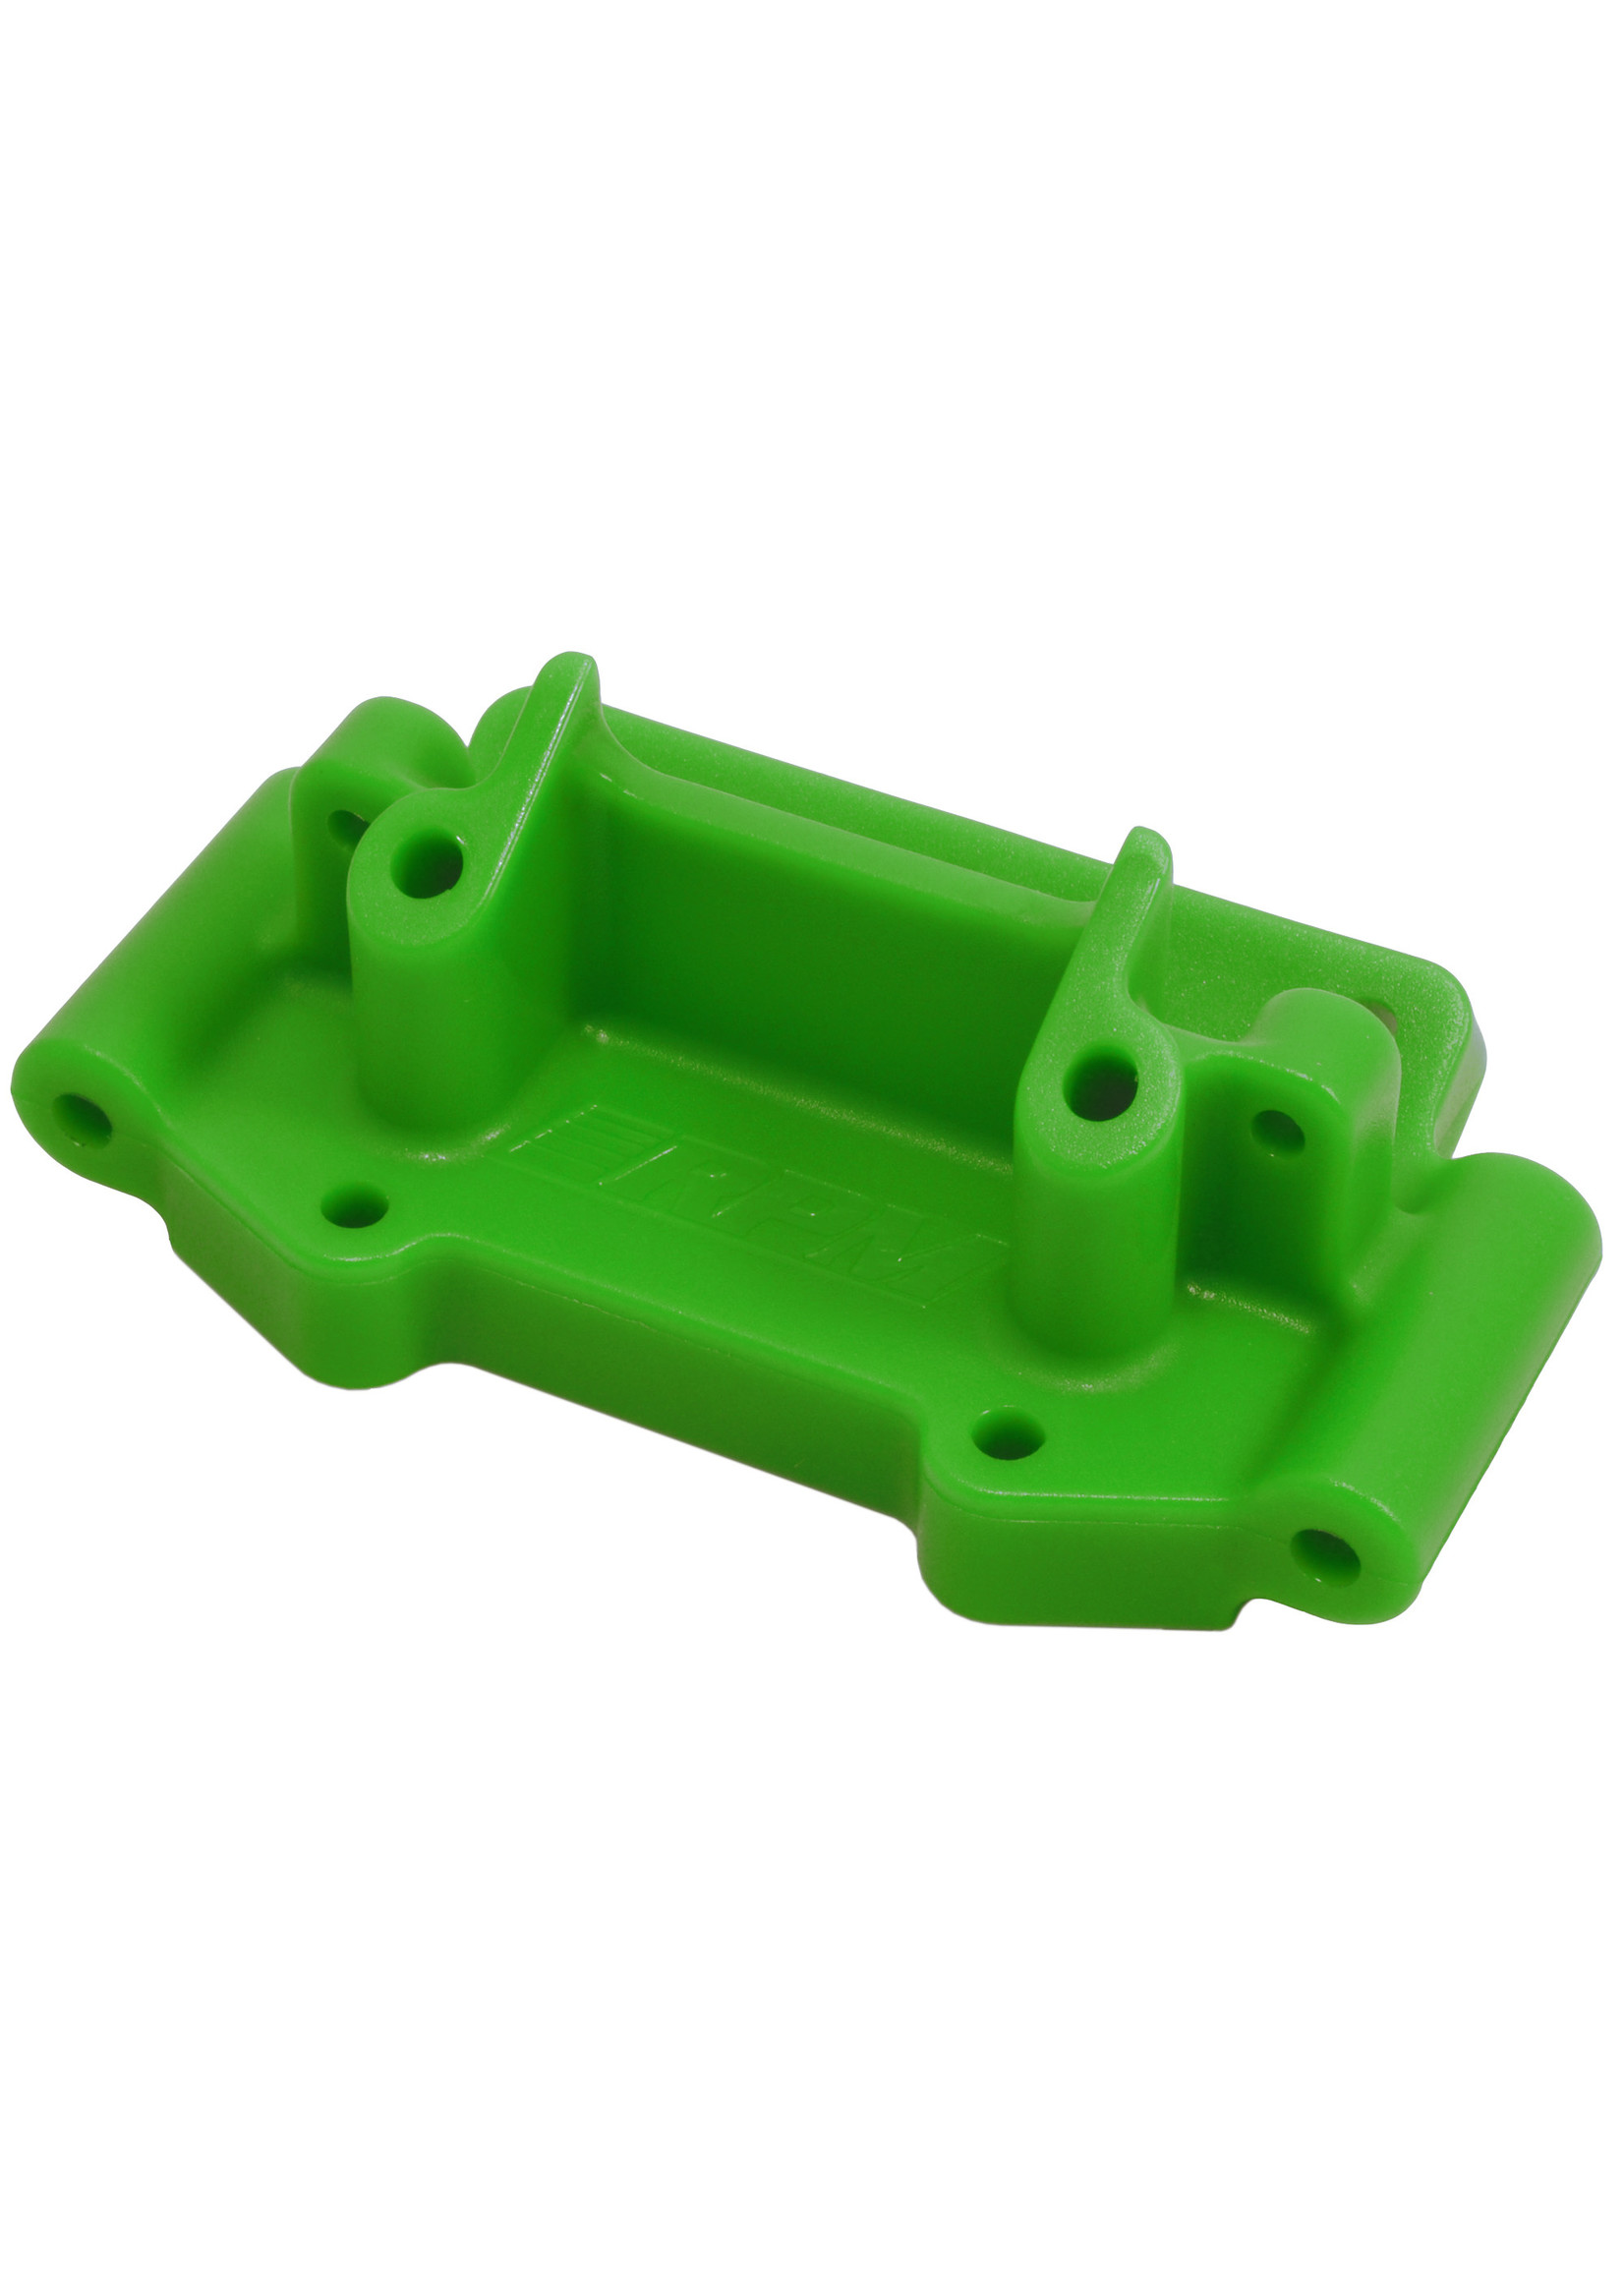 RPM 73754 - Front Bulkhead for 1/10 Traxxas 2WD - Green